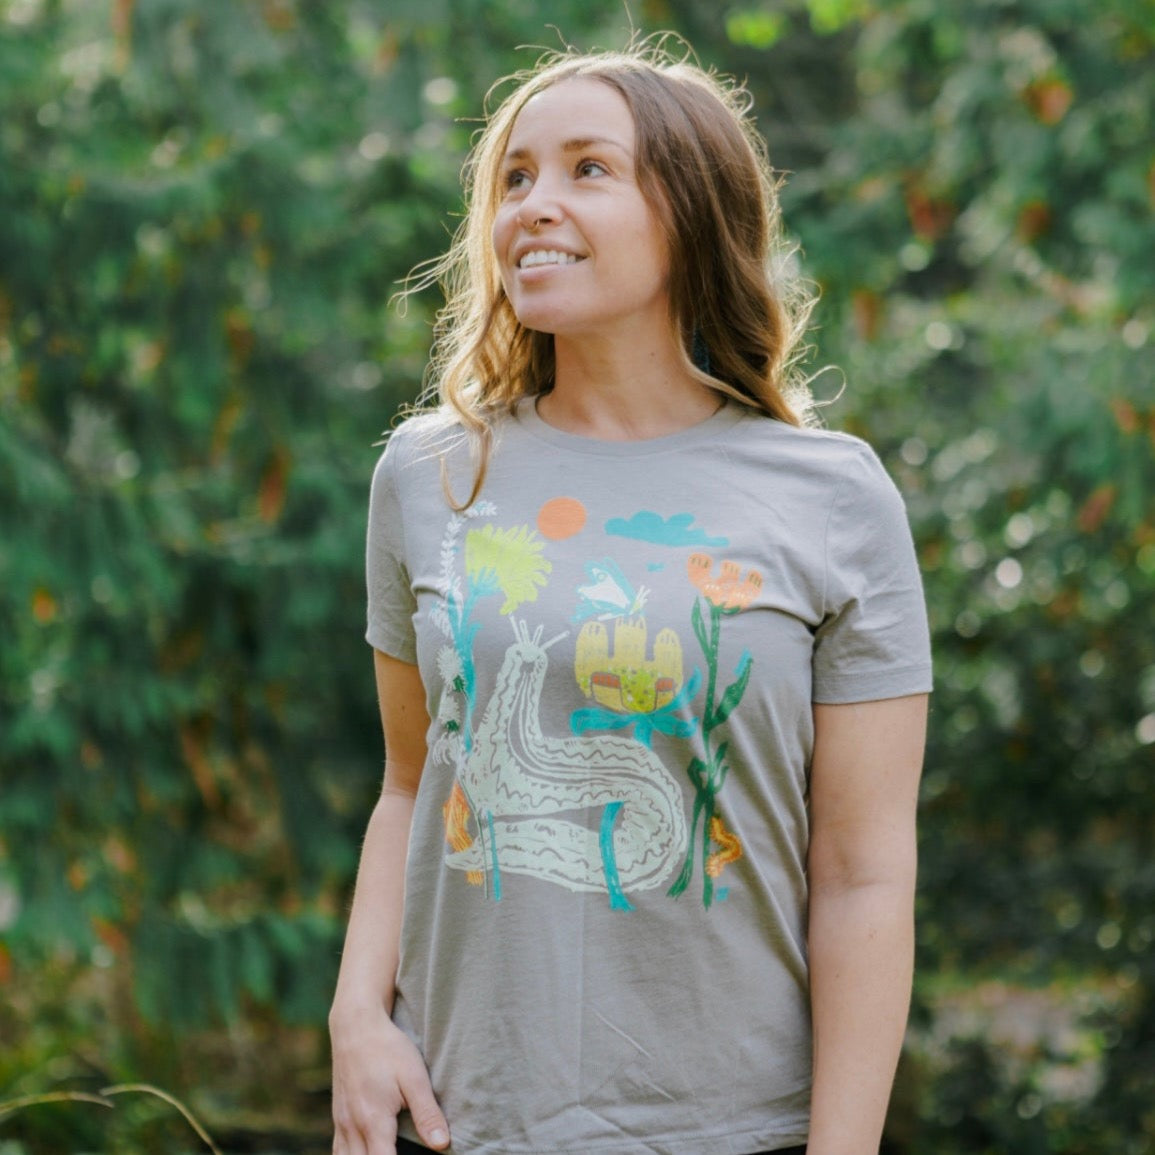 Woman wearing light brown t shirt with colorful print of plants and bugs -